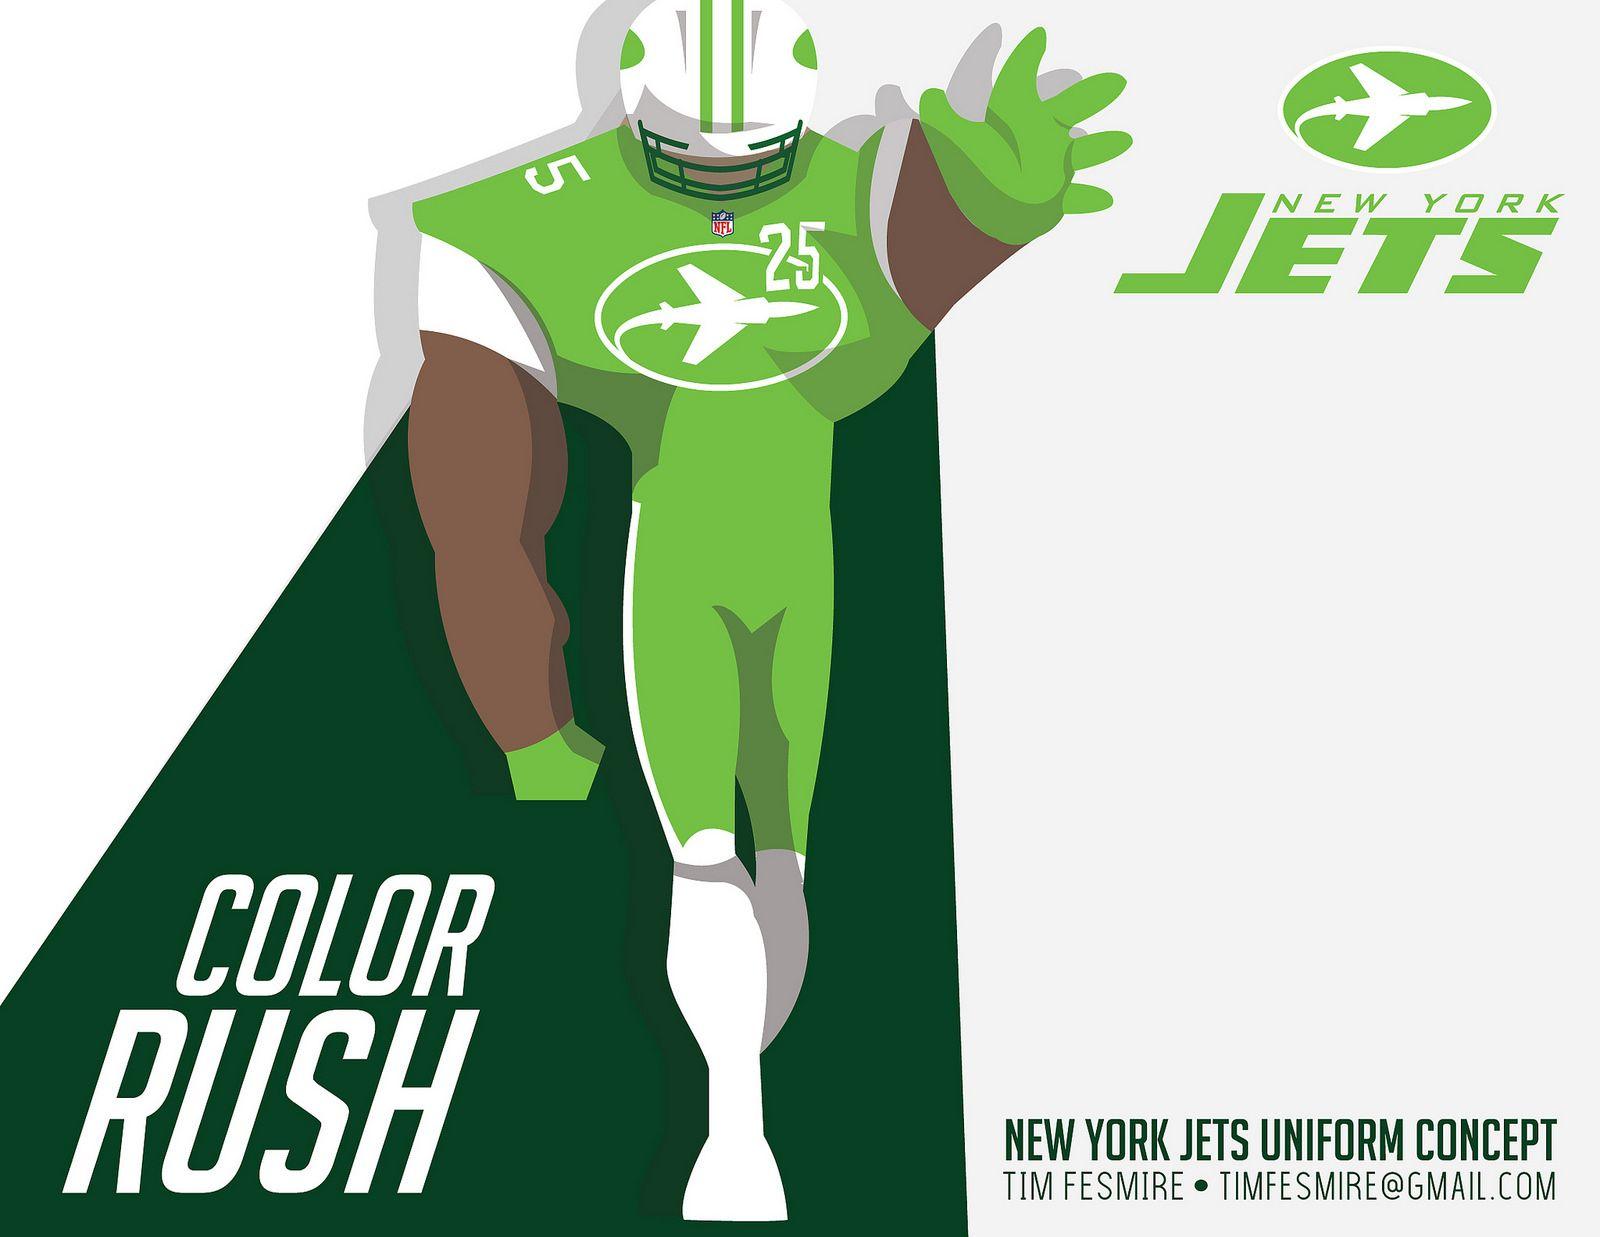 NY Jets Logo - Uni Watch delivers the winning entries for the New York Jets ...